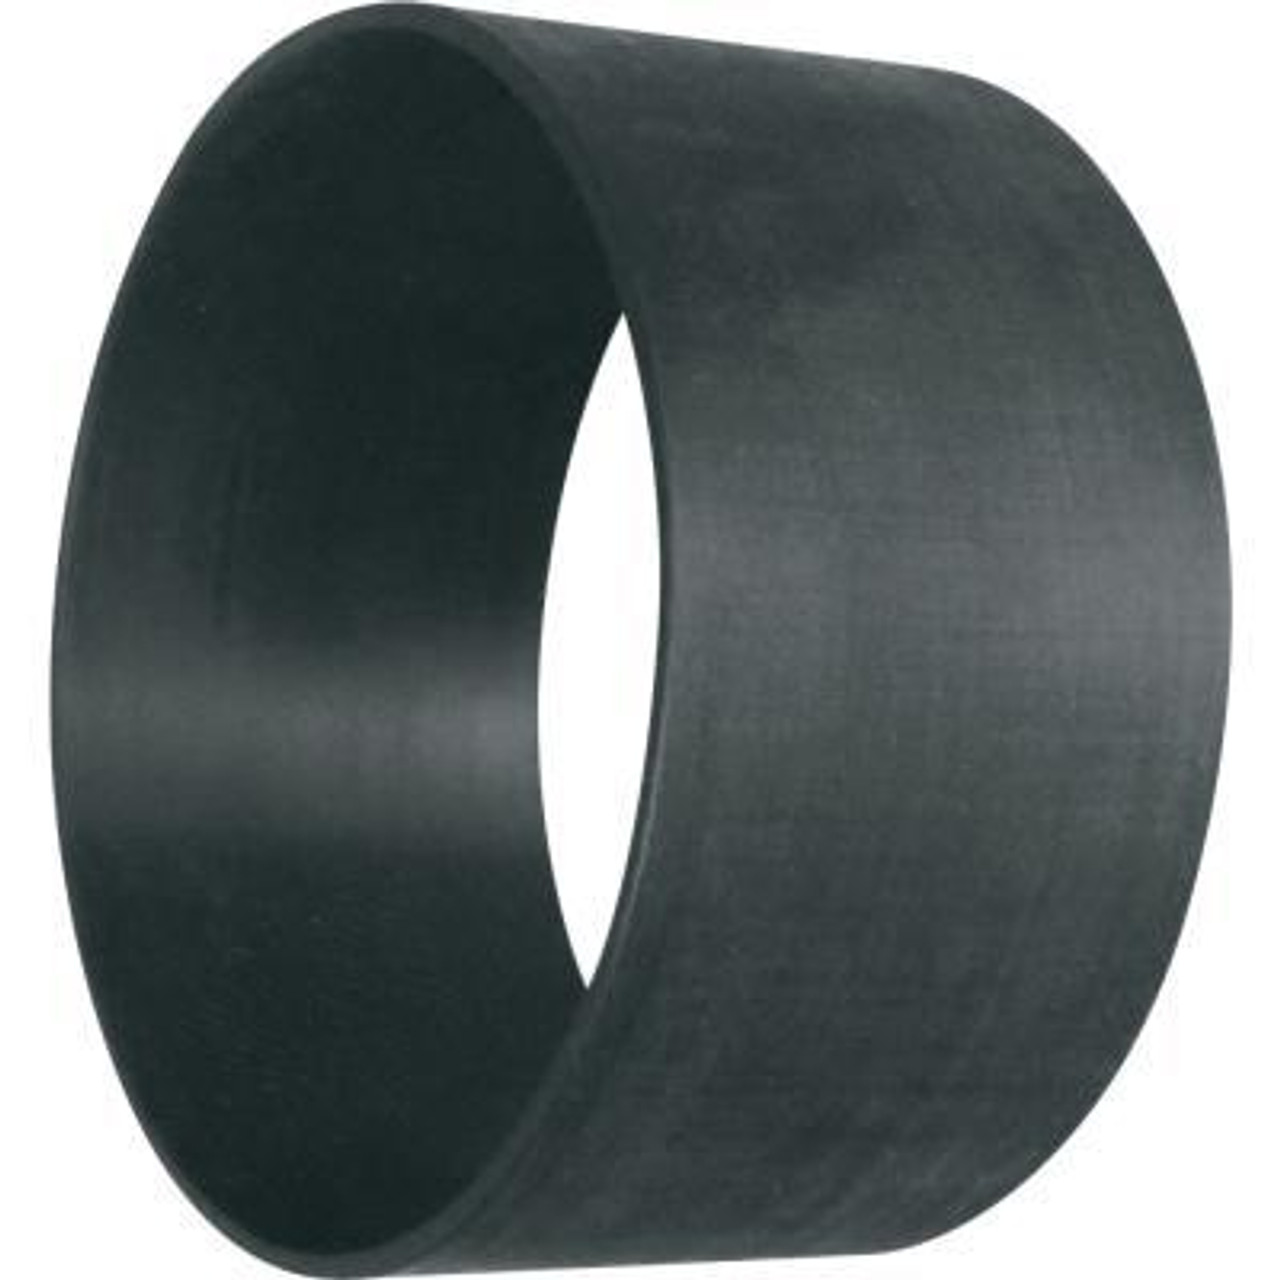 Wsm New Replacement Wear Ring, 003-520